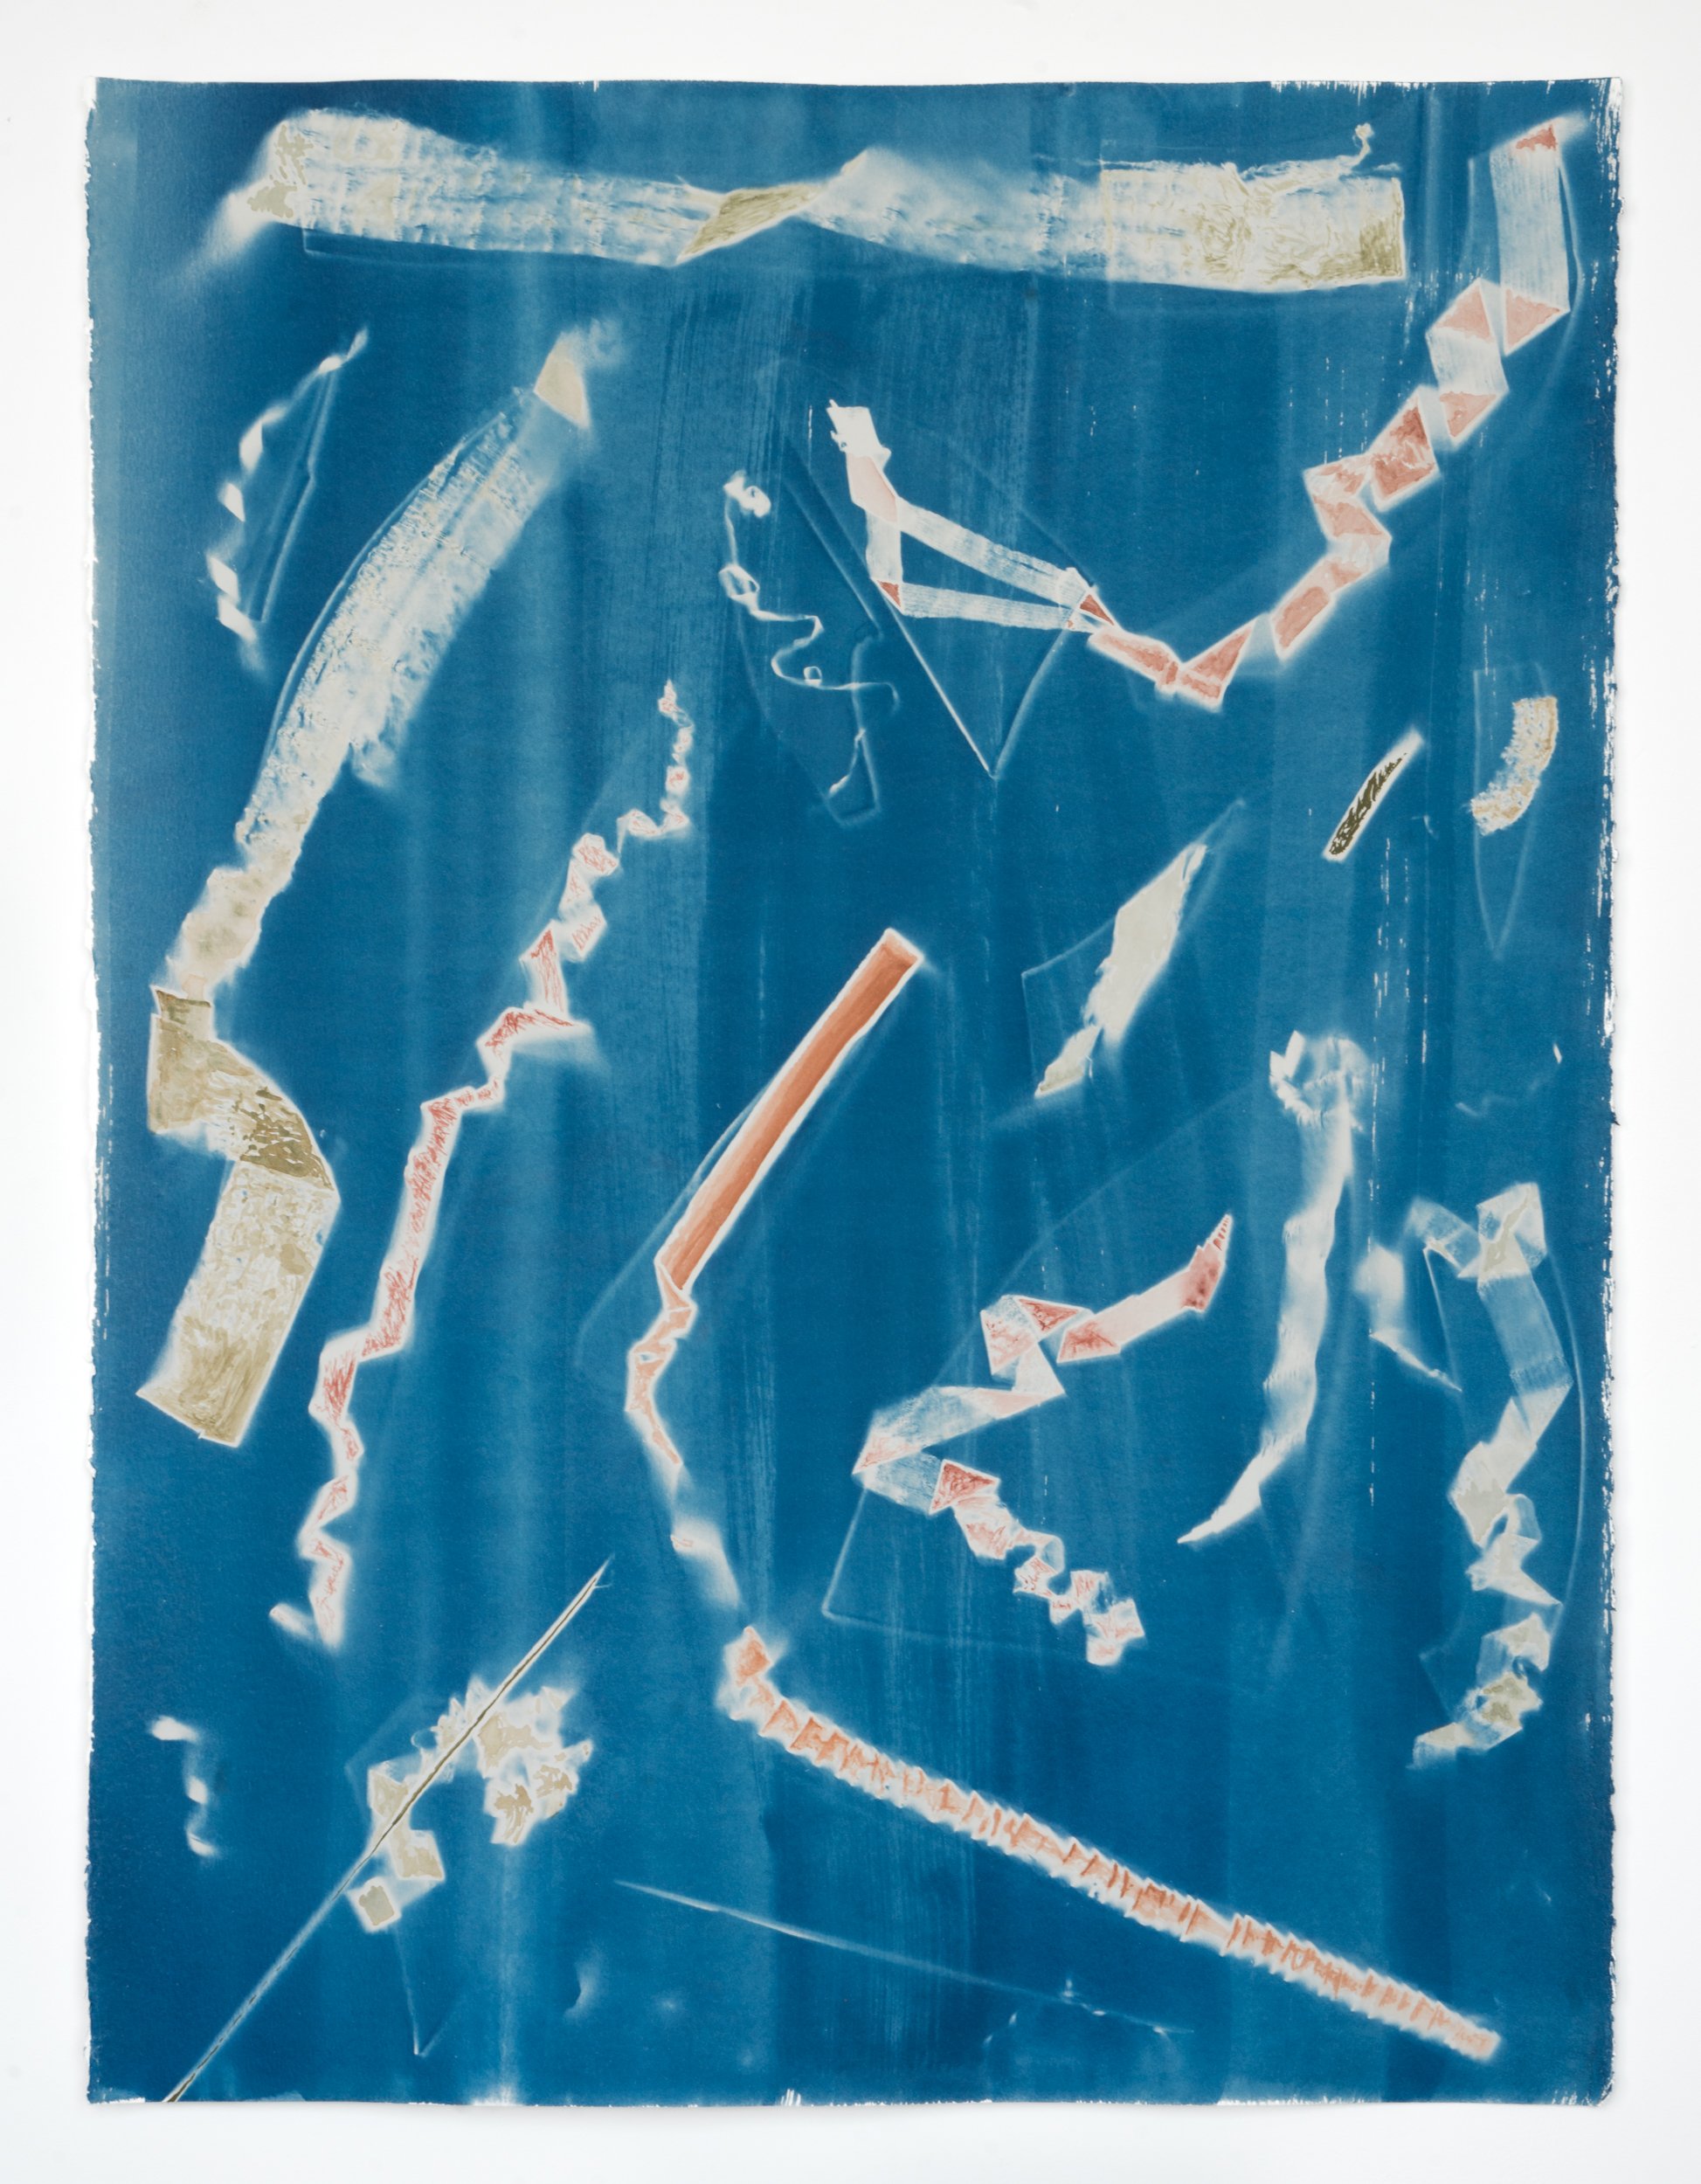   spotting  (exposed 7.31.23)  cyanotype and earth pigments on paper, 29 3/4 x 22 1/2”  2023 